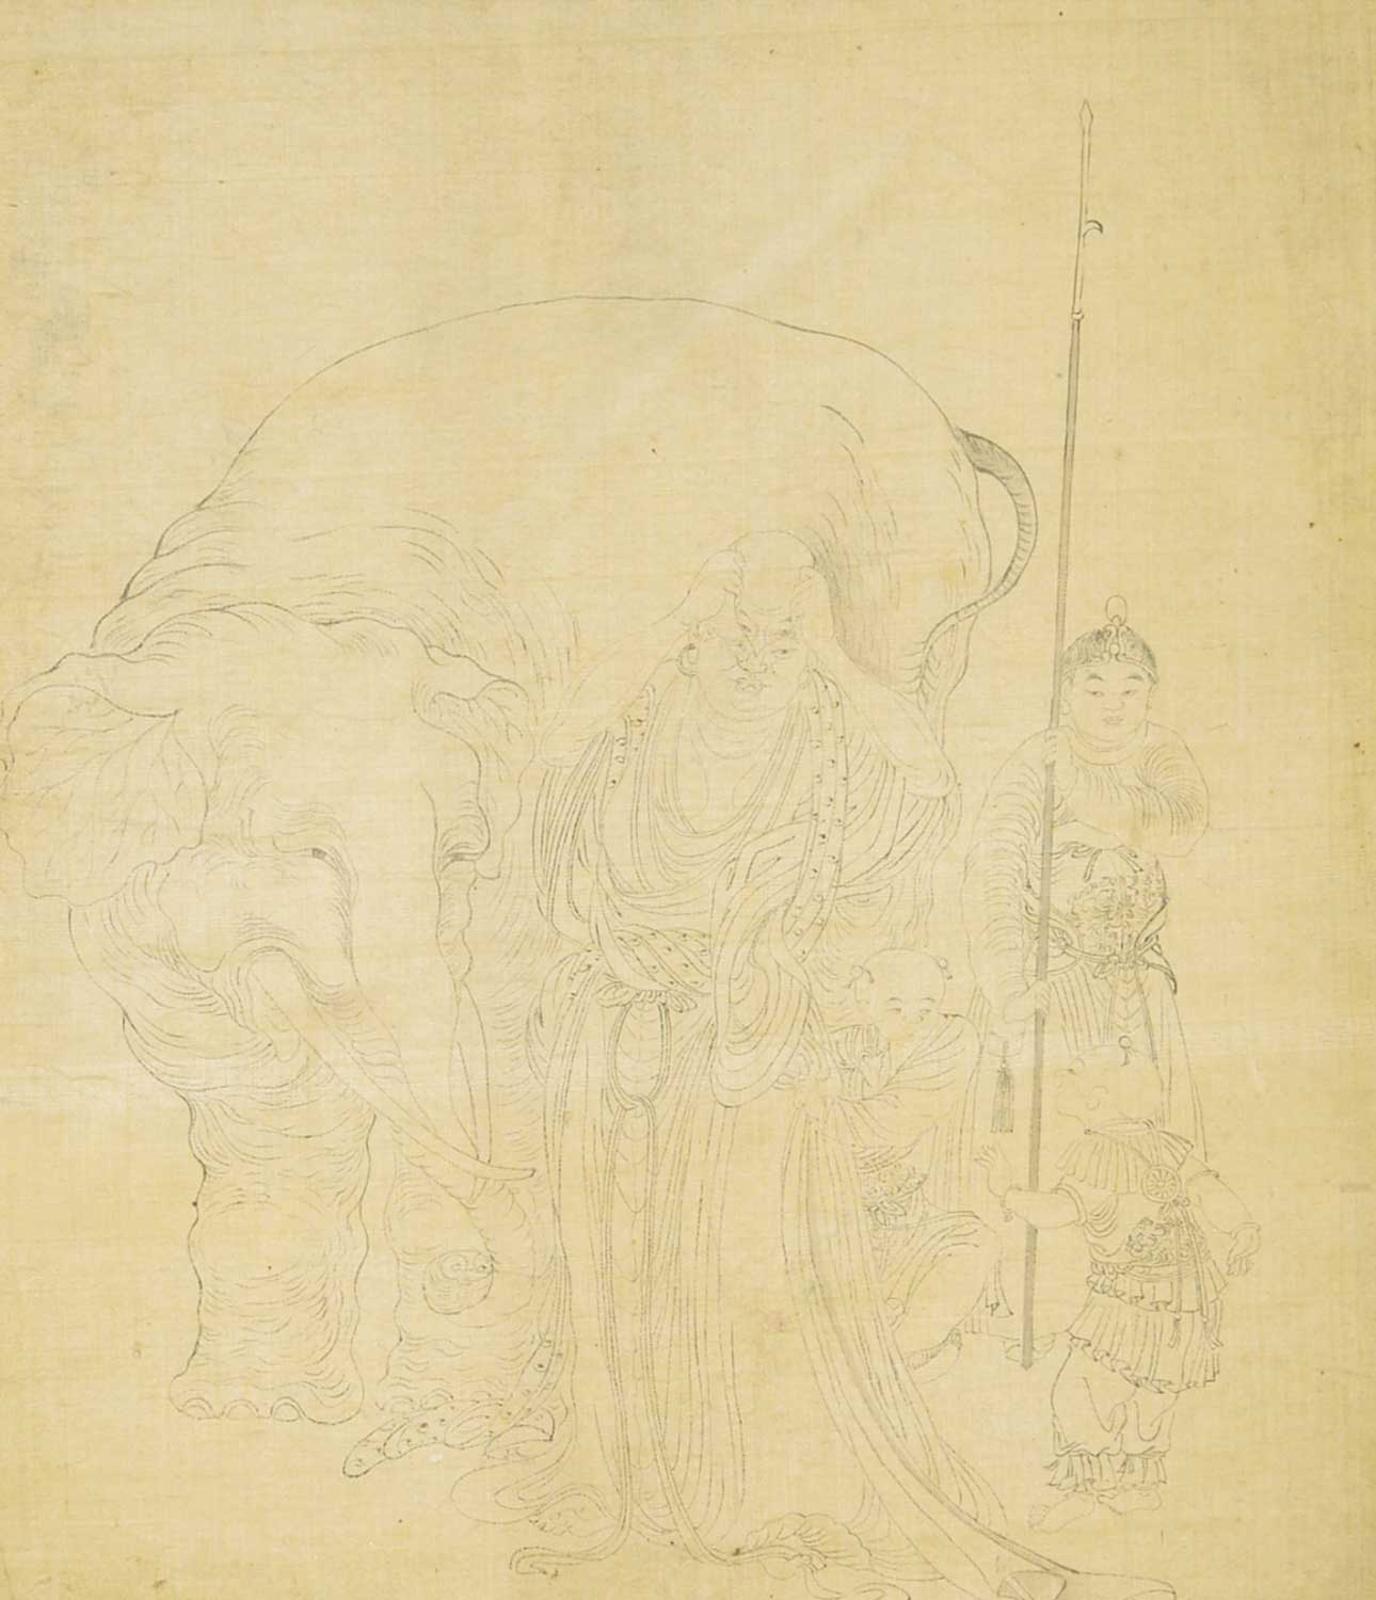 Asian School - Untitled - Masked Men with Elephant